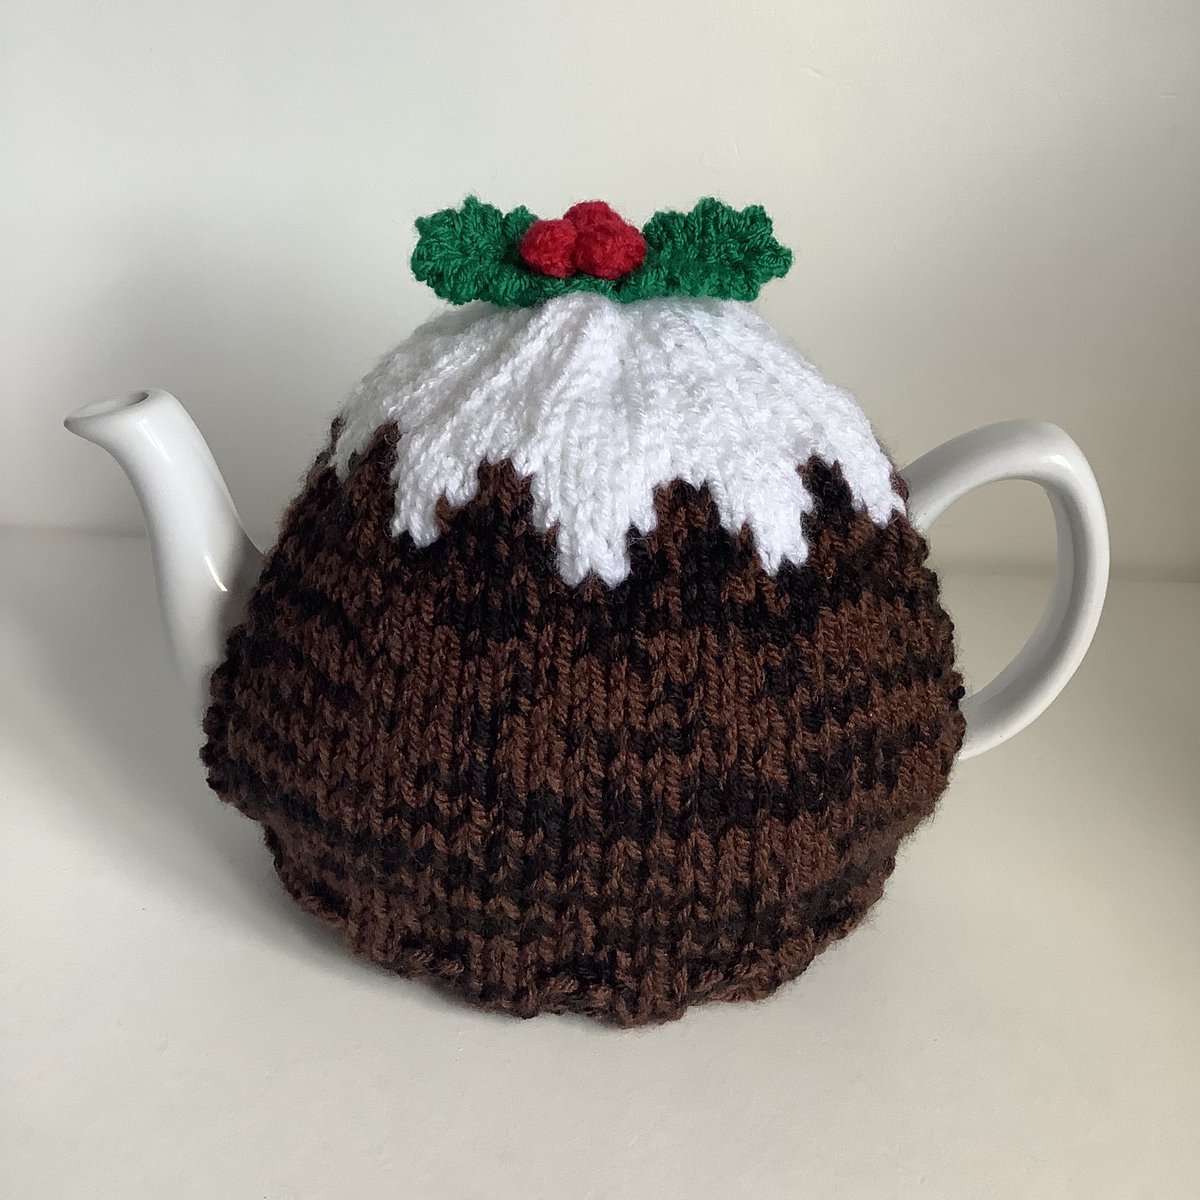 We are on the official countdown to Christmas 🎅🏼 Our hand knit Christmas pudding tea cosy is available now at Amazon! amazon.co.uk/dp/B08CBJLX7W #ChristmasPudding #Christmasteacosy #Teacosy #amazonhandmade #secretsanta #christmasdecor #xmasdecor #teacozy #teapotcover